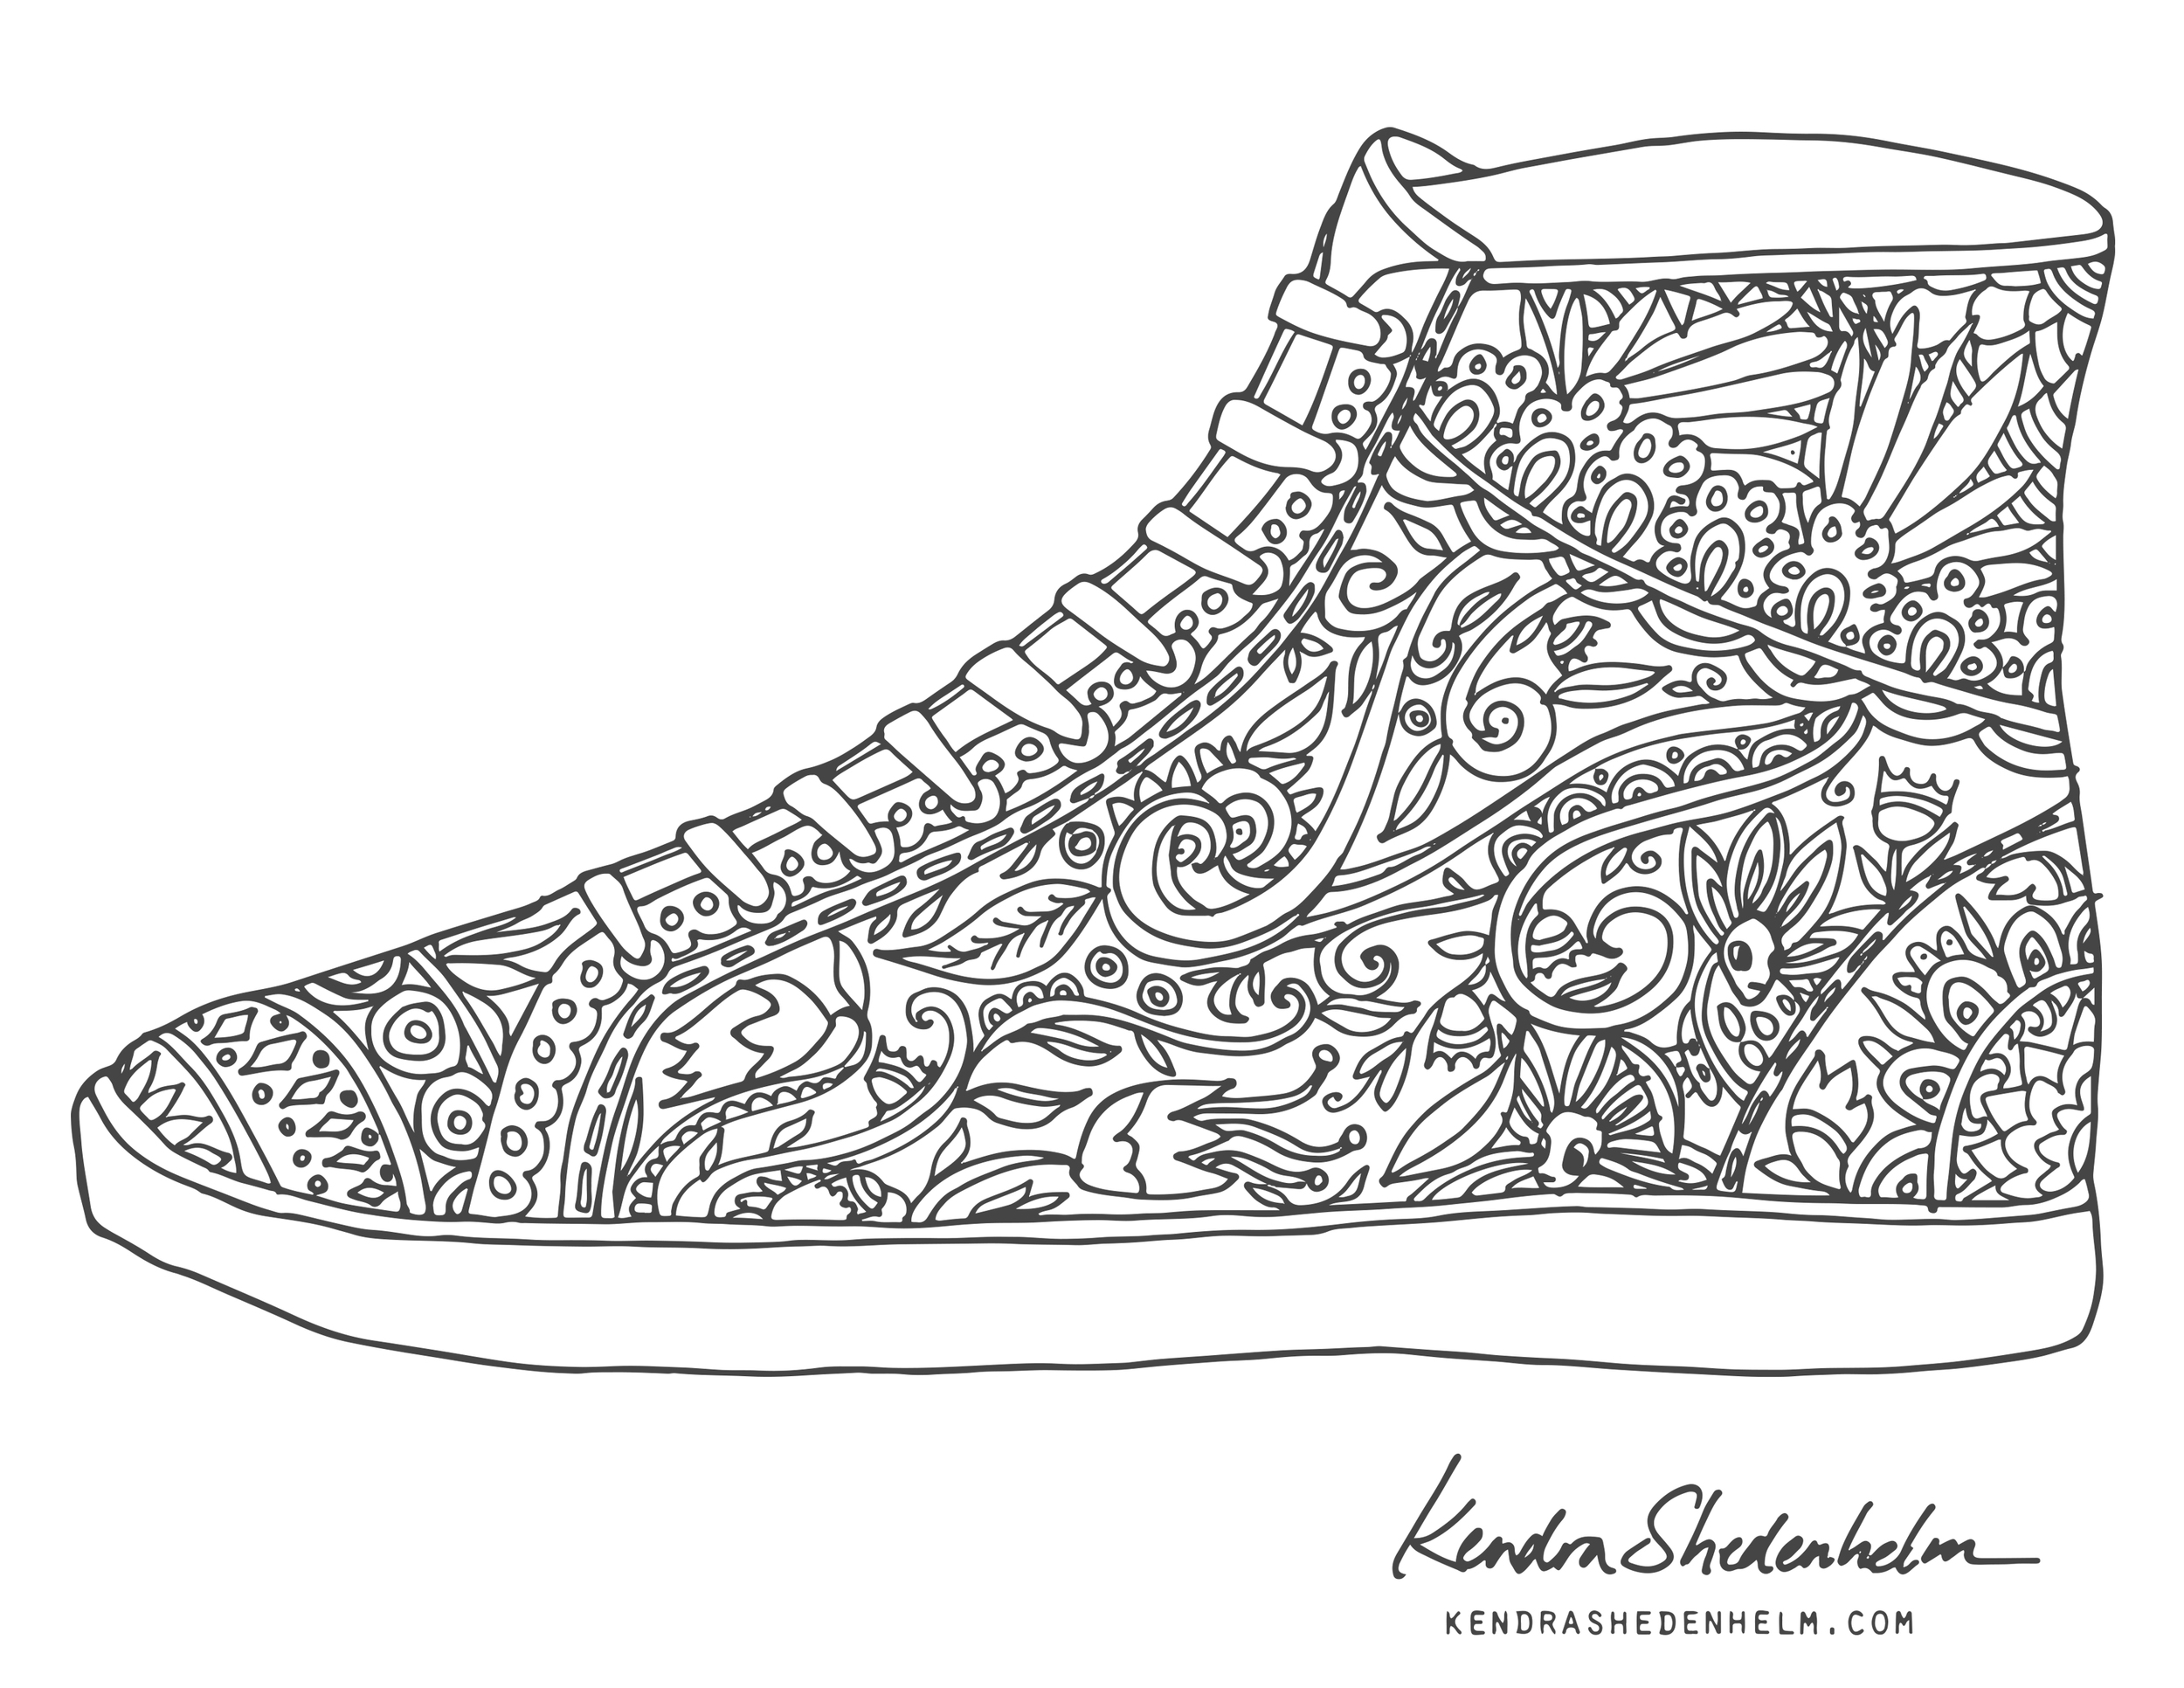 Birds doodles shoes and free coloring pages â kendra shedenhelm